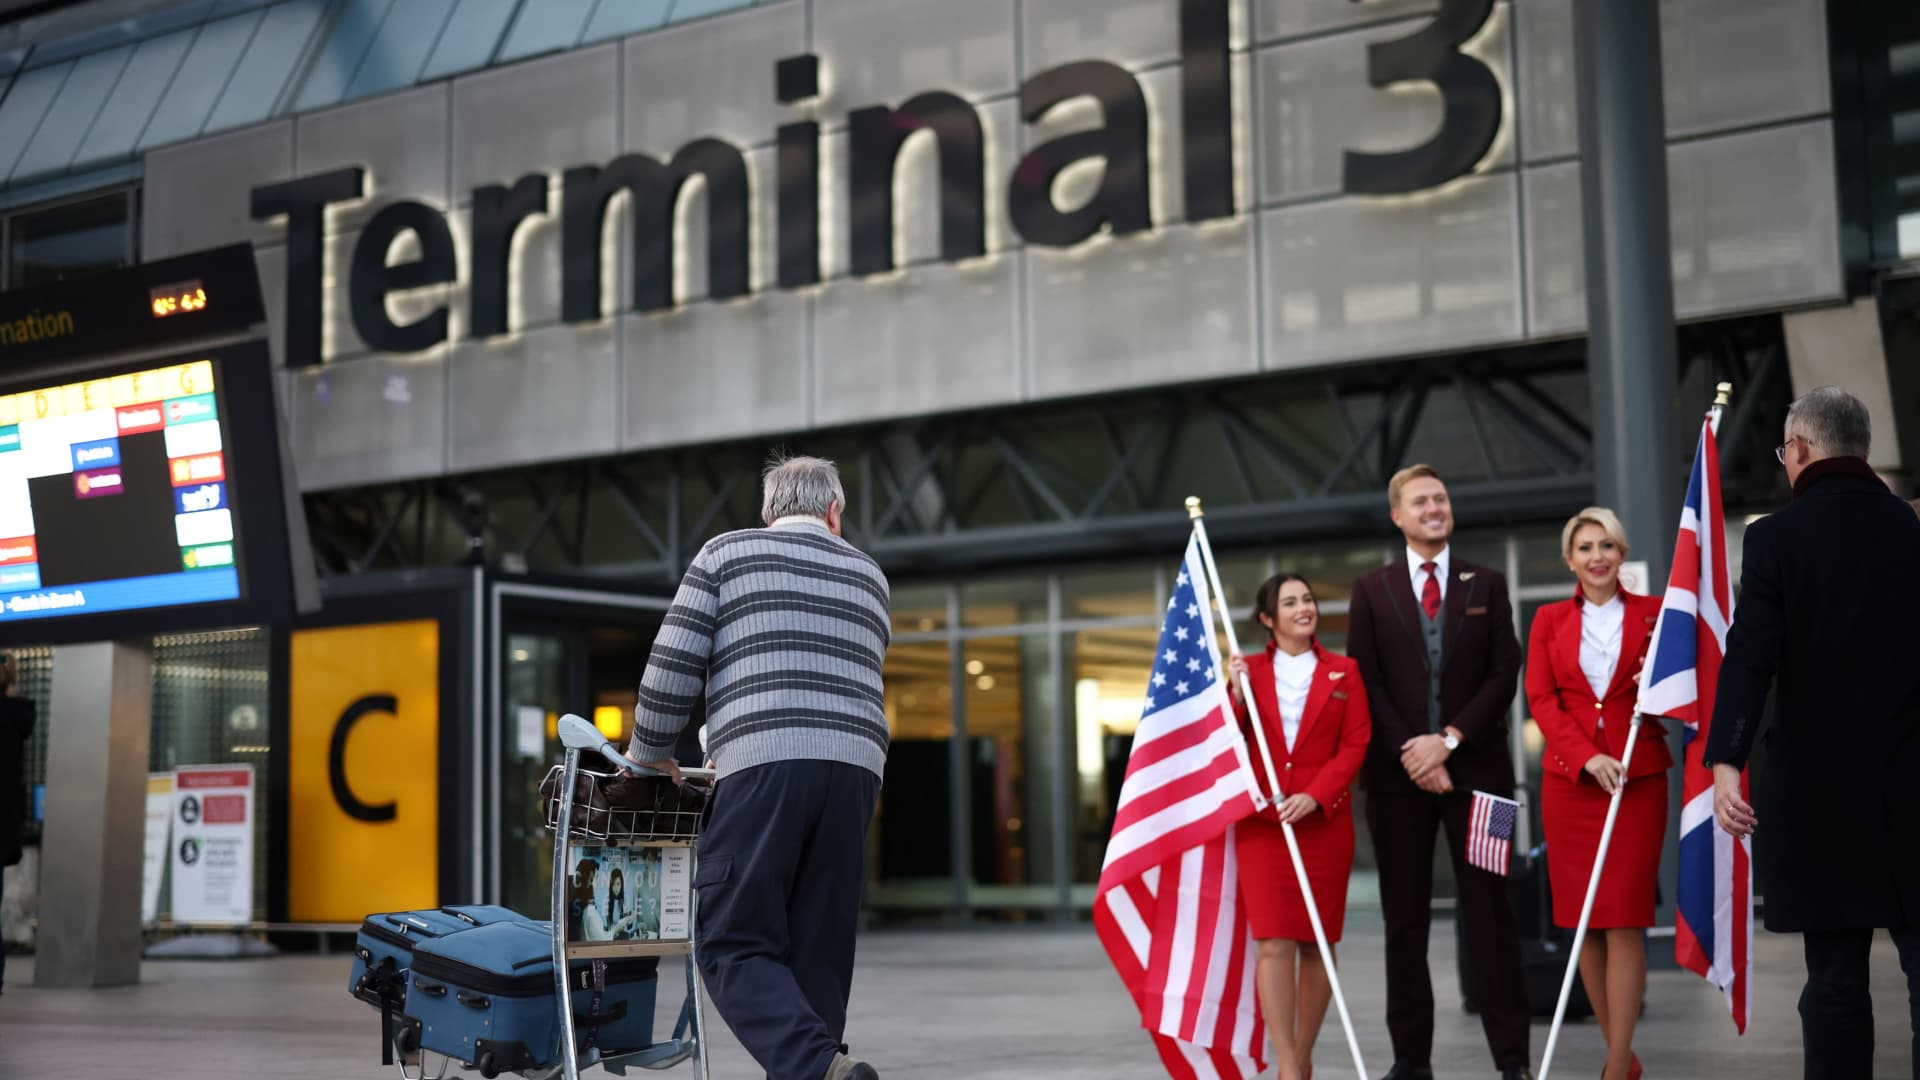 A traveller arrives at Heathrow Airport Terminal 3, following the lifting of restrictions on the entry of non-U.S. citizens to the United States imposed to curb the spread of the coronavirus disease (COVID-19), in London, Britain, November 8, 2021.